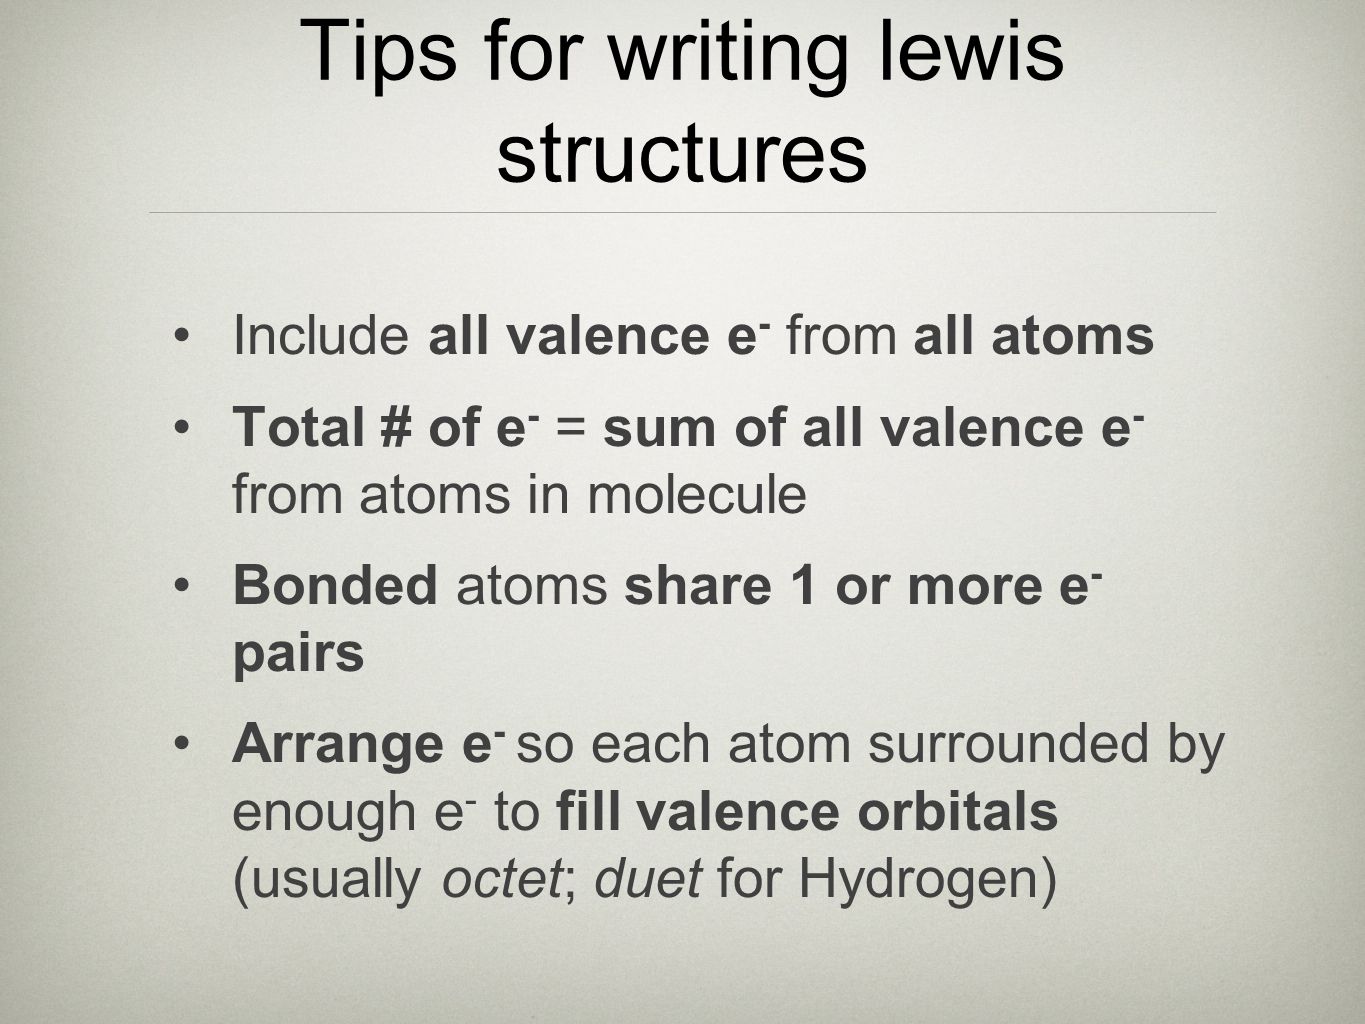 Tips for writing lewis structures Include all valence e - from all atoms Total # of e - = sum of all valence e - from atoms in molecule Bonded atoms share 1 or more e - pairs Arrange e - so each atom surrounded by enough e - to fill valence orbitals (usually octet; duet for Hydrogen)